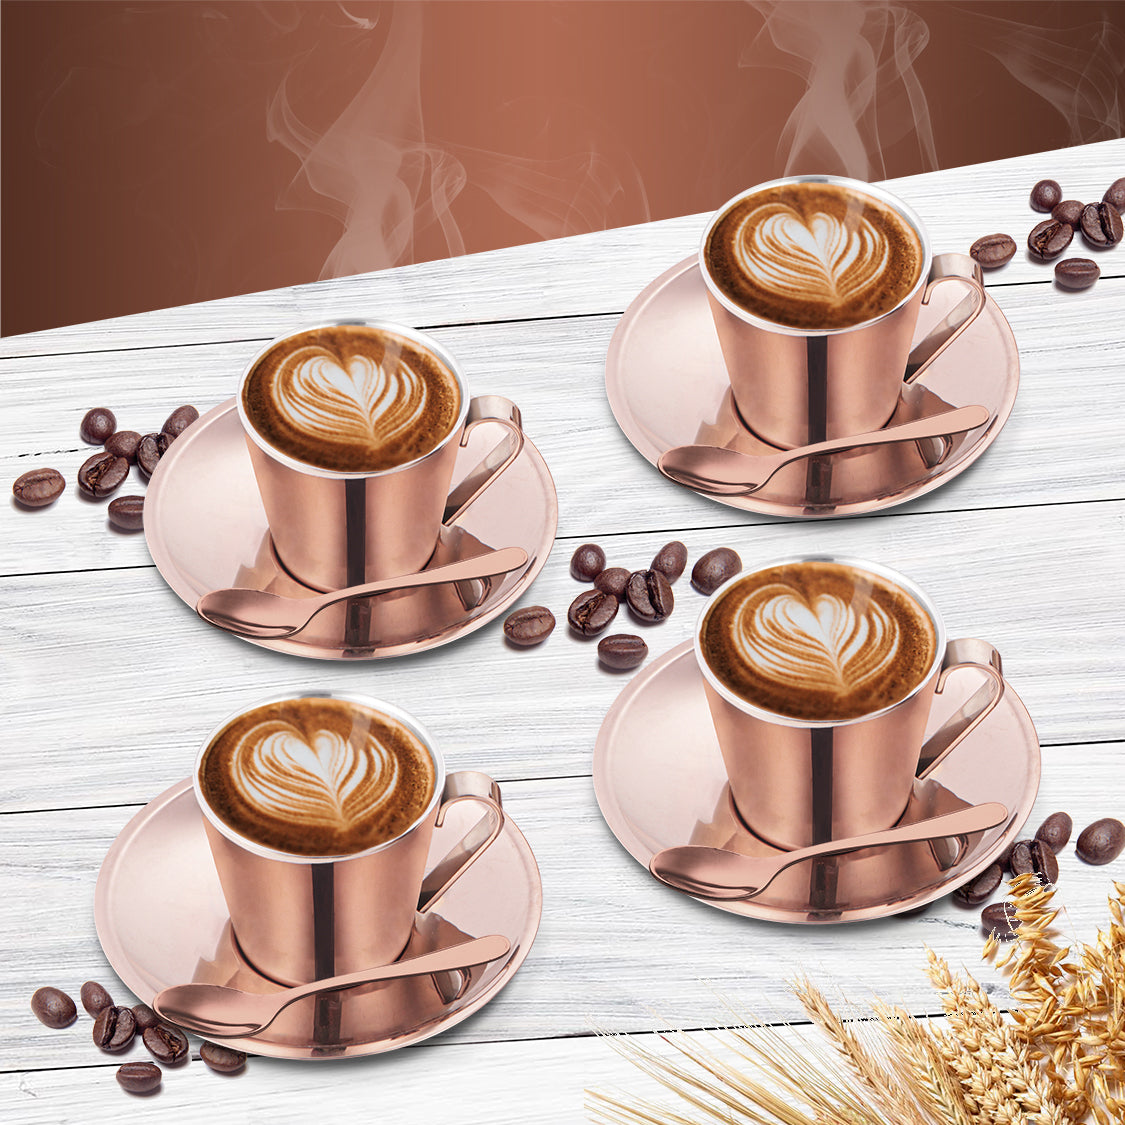 Stainless Steel 4 PCS Double Wall Cup and Saucer with Rose Gold PVD Coating Rise